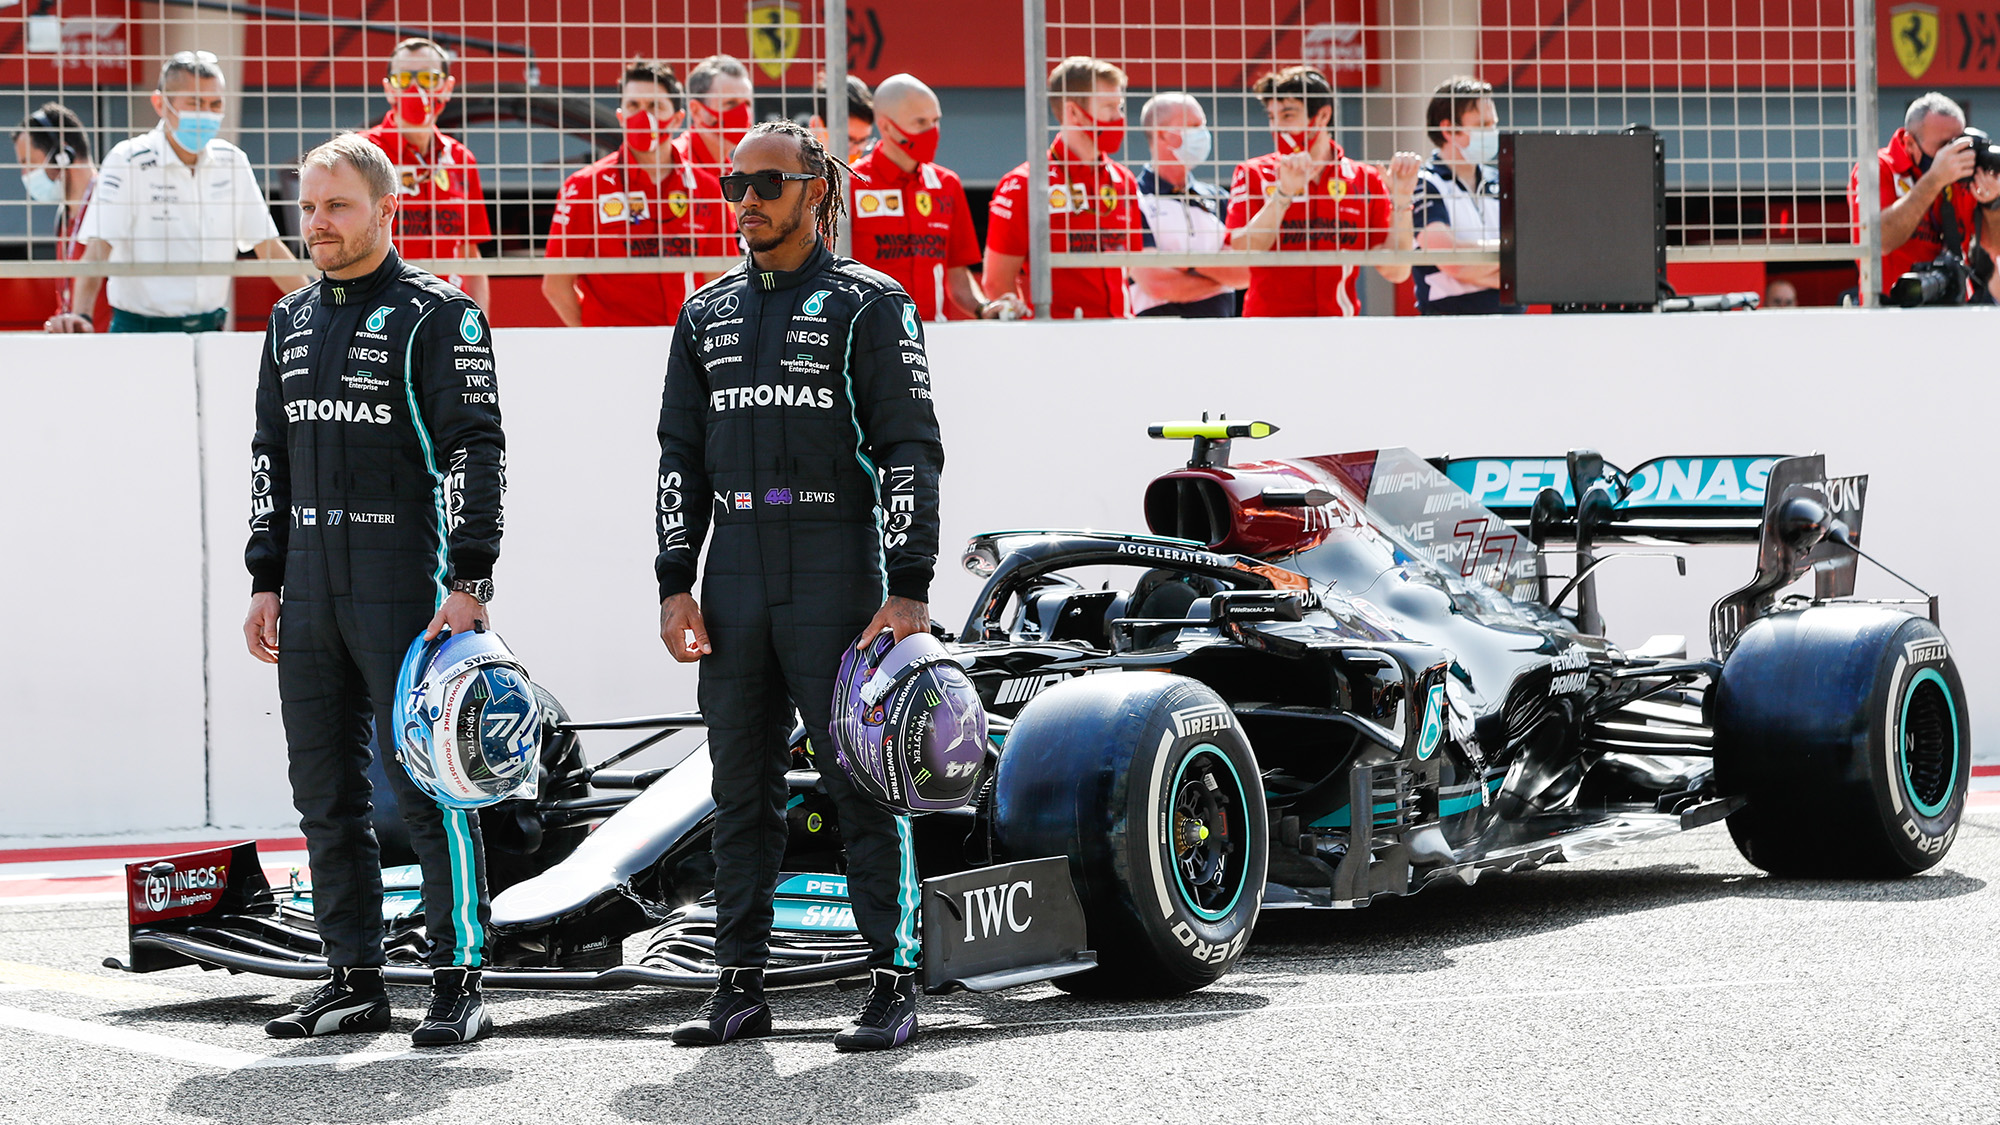 Mercedes worried about Bottas' and Vettel's gearbox issues